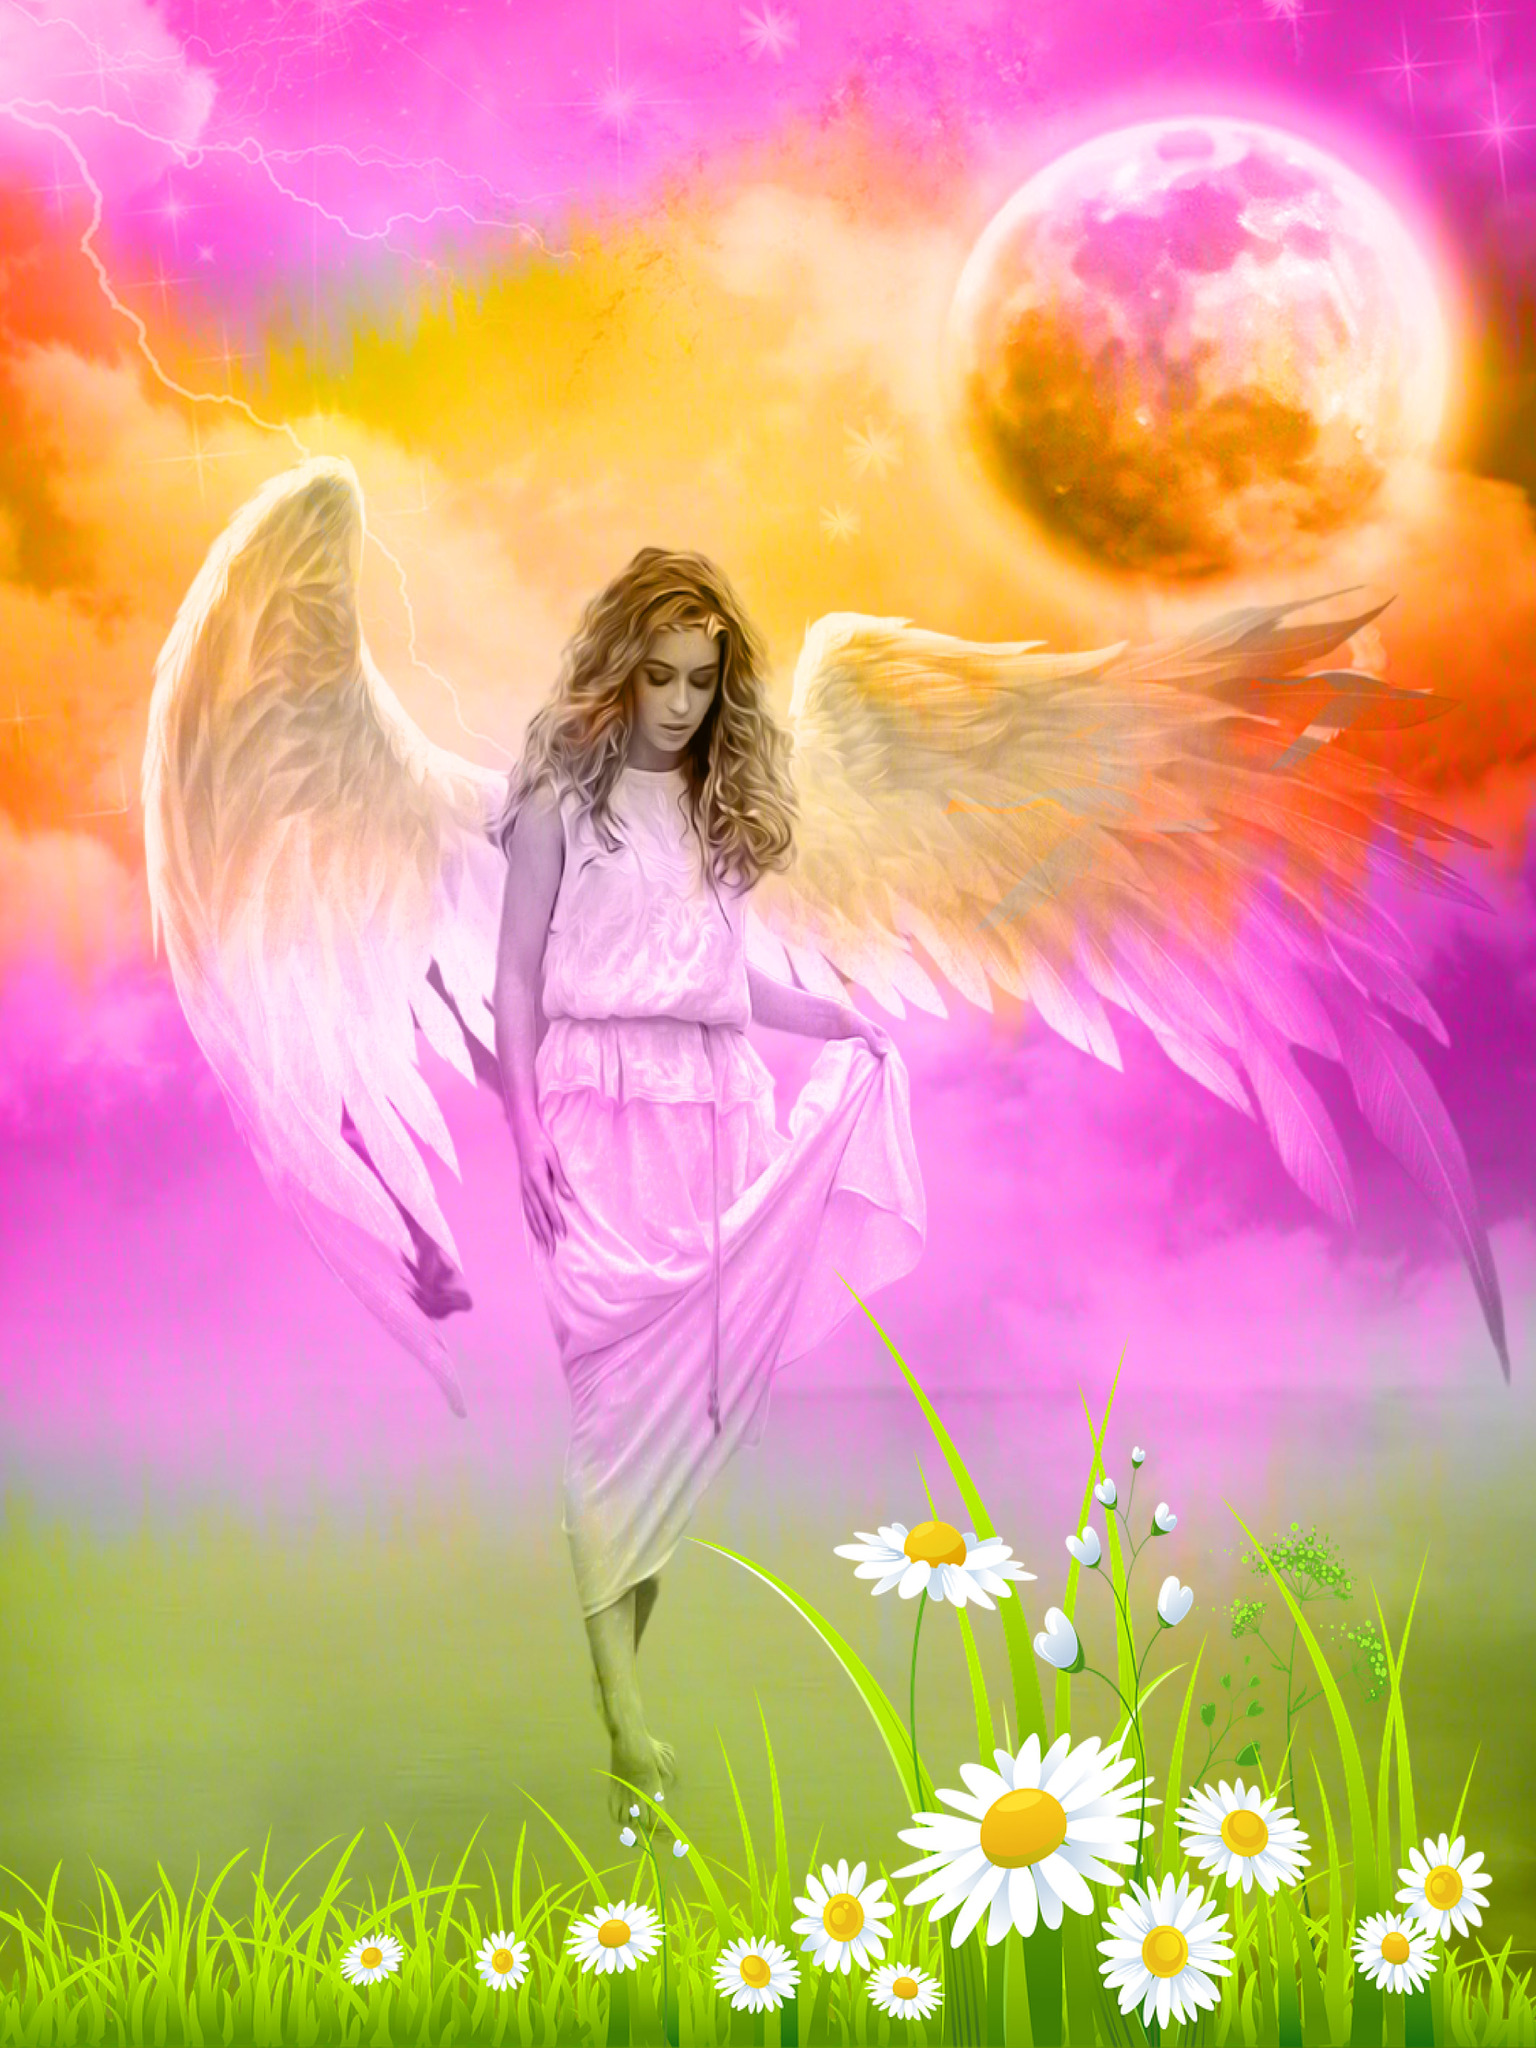 Graphic Art "The planet where angels live"